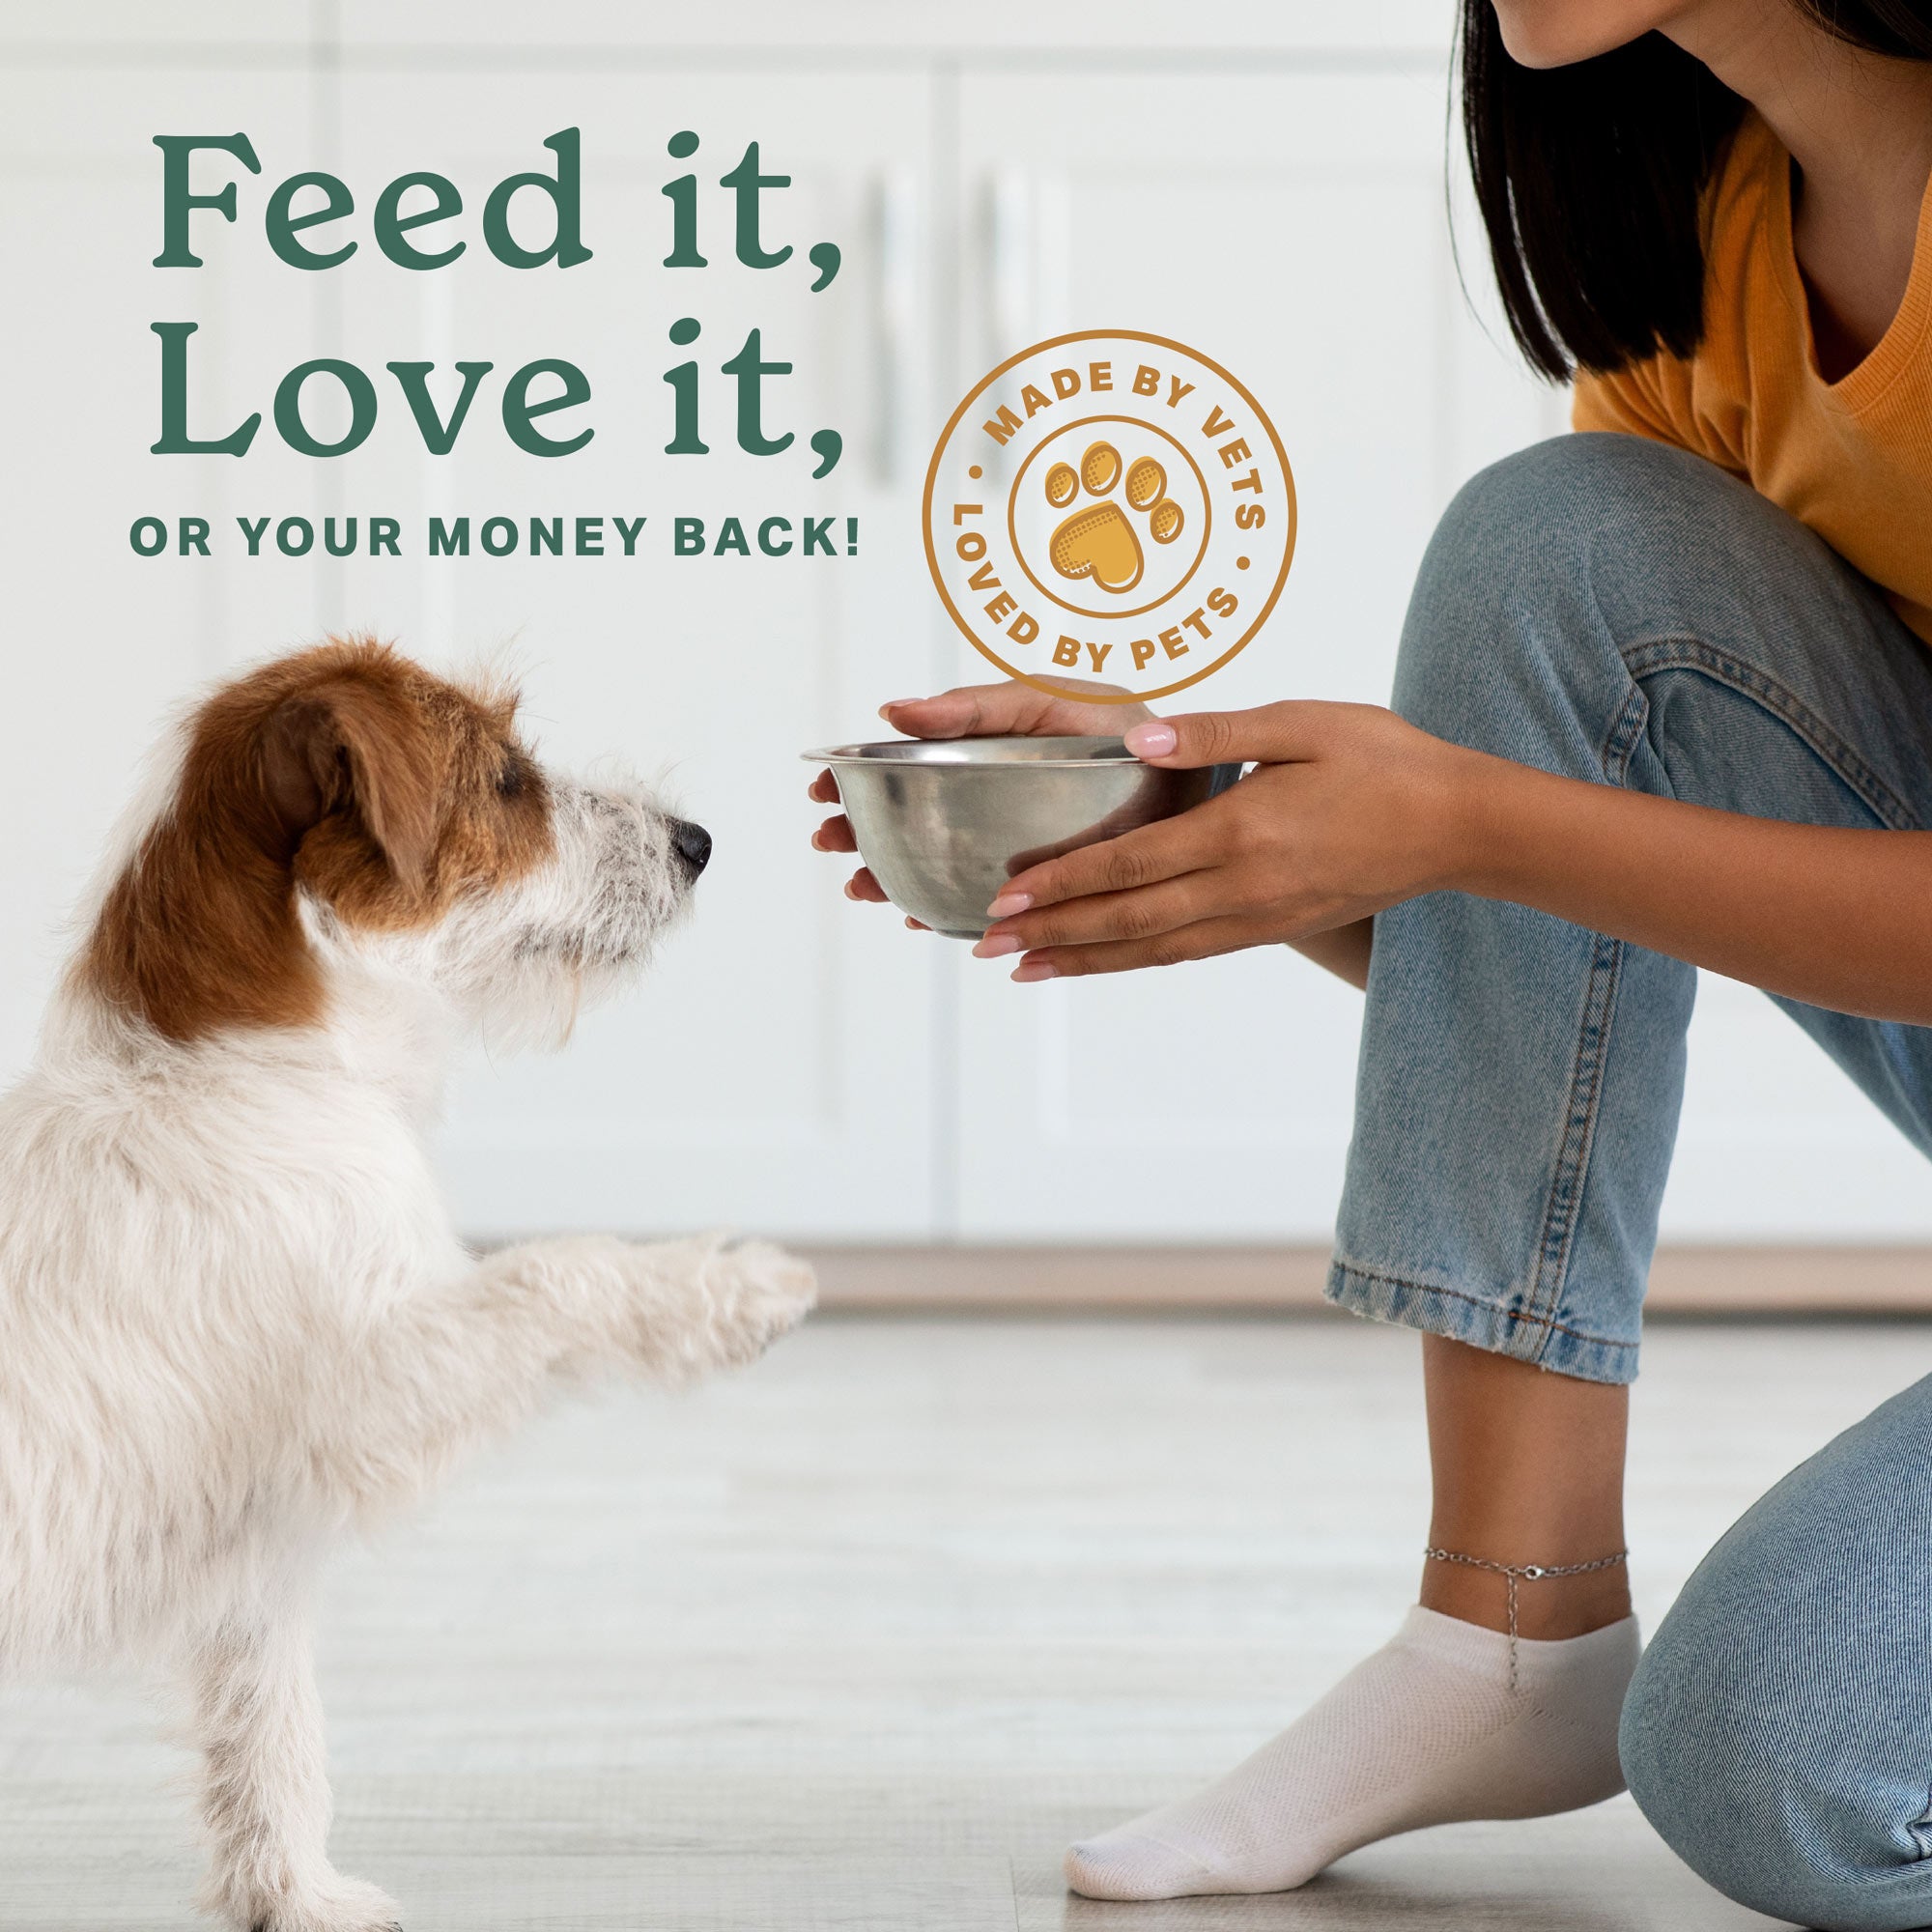 Feed it, love it or your money back!  Made by vets, loved by pets.